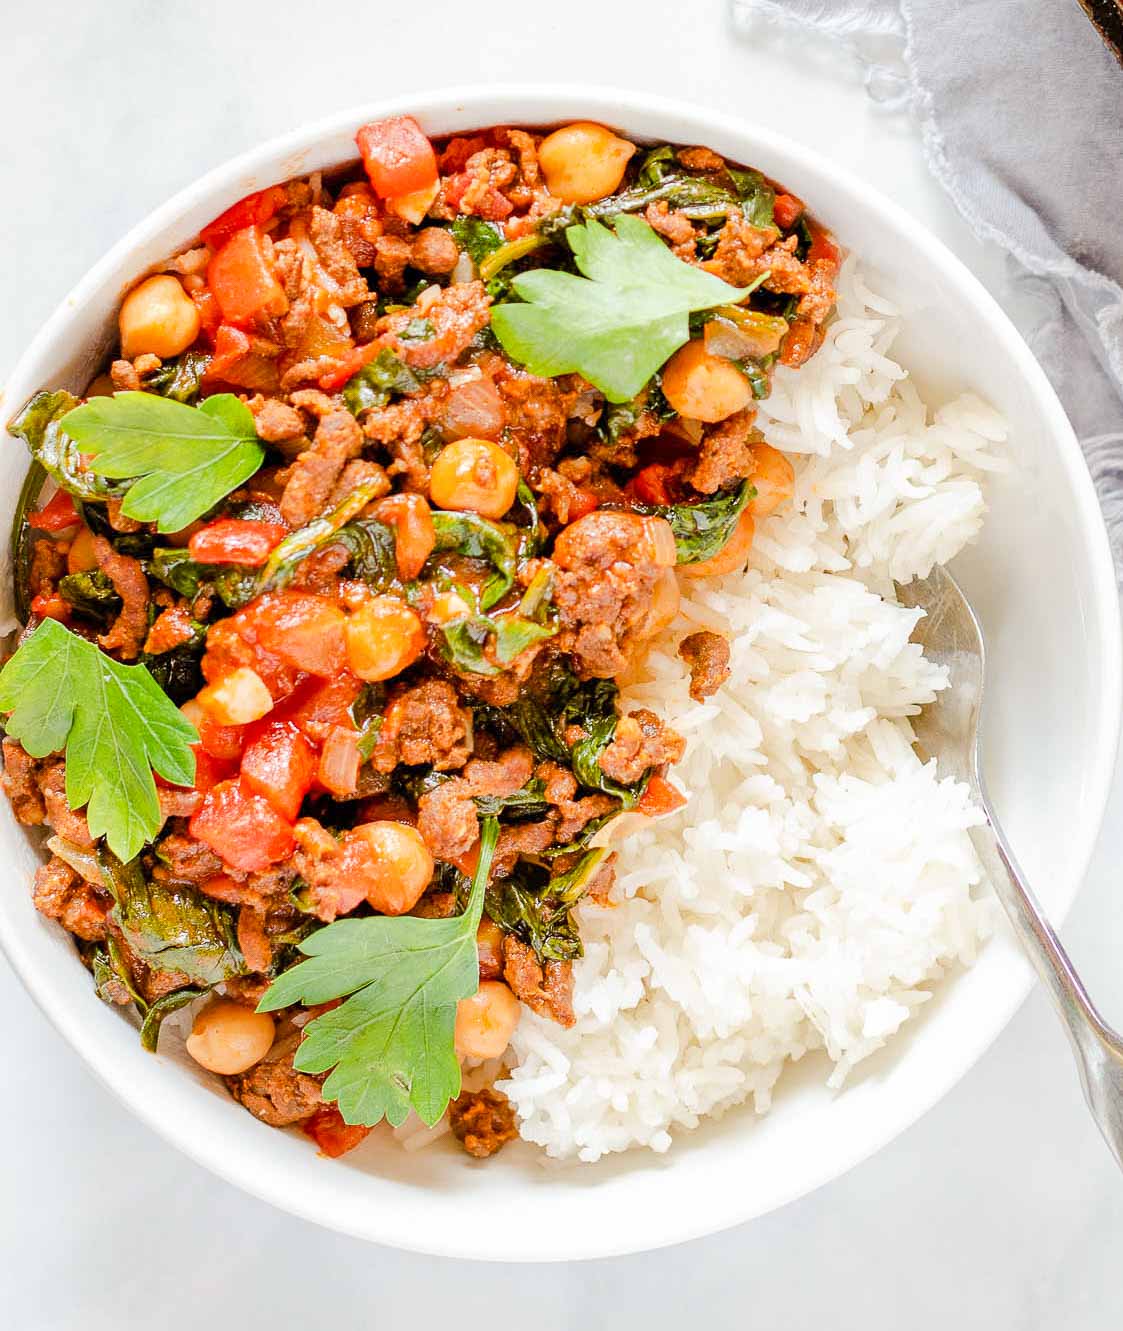 Chorizo chickpea stew over rice in a bowl.